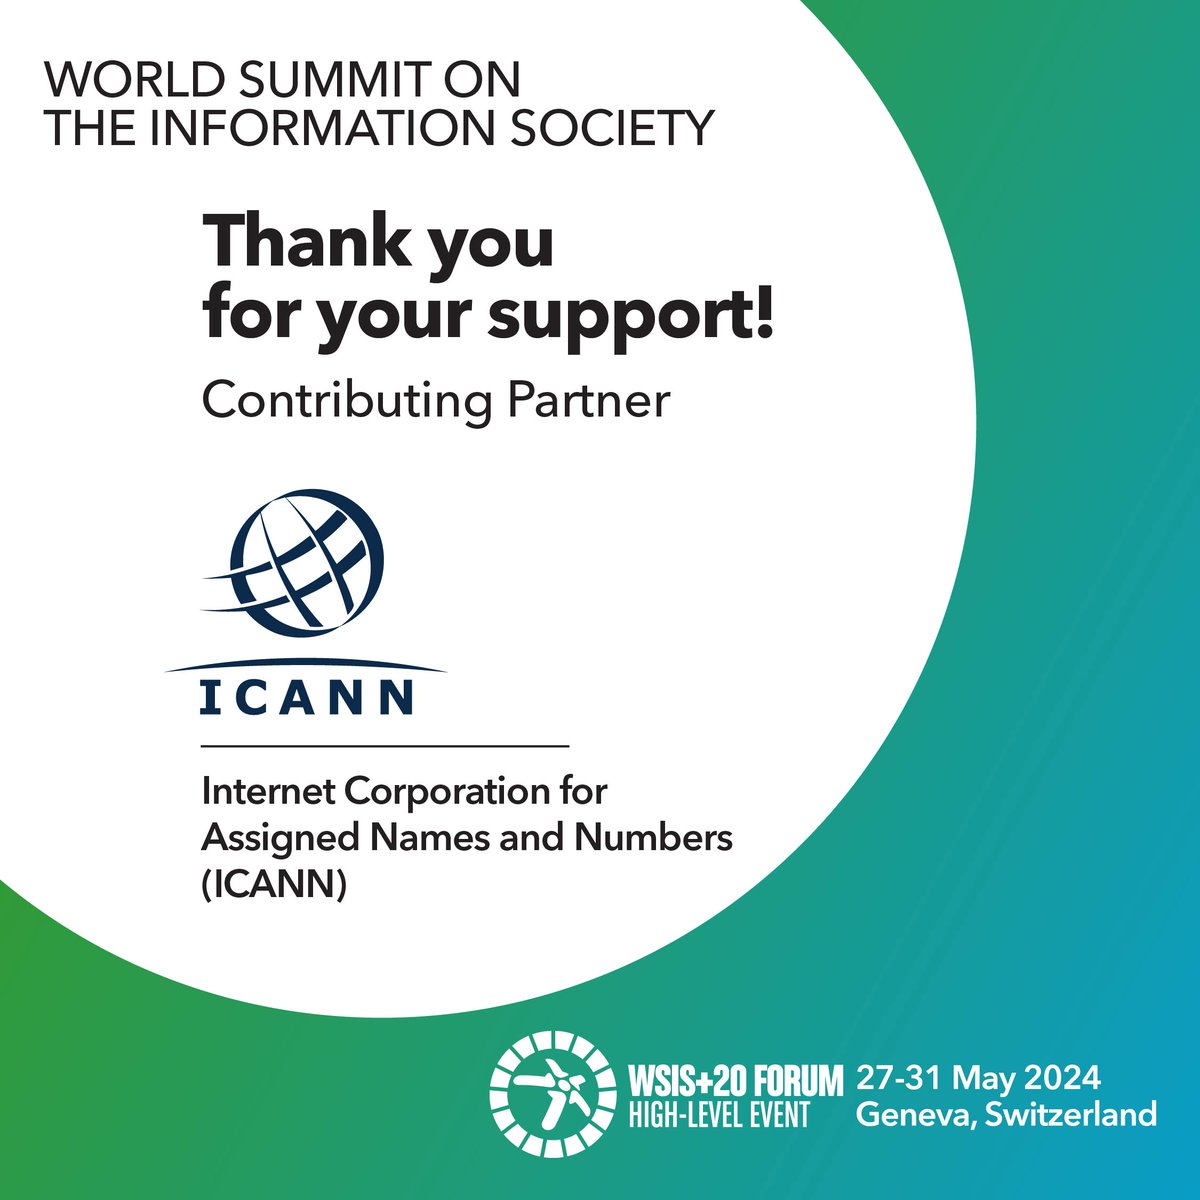 📣 PARTNERSHIP ANNOUNCEMENT! Thank you, @ICANN for your continuous support to the #WSIS process! Join us at the WSIS Forum, register NOW at: wsis.org/forum #partnership #ICANN #events #itu #digital #sdgs